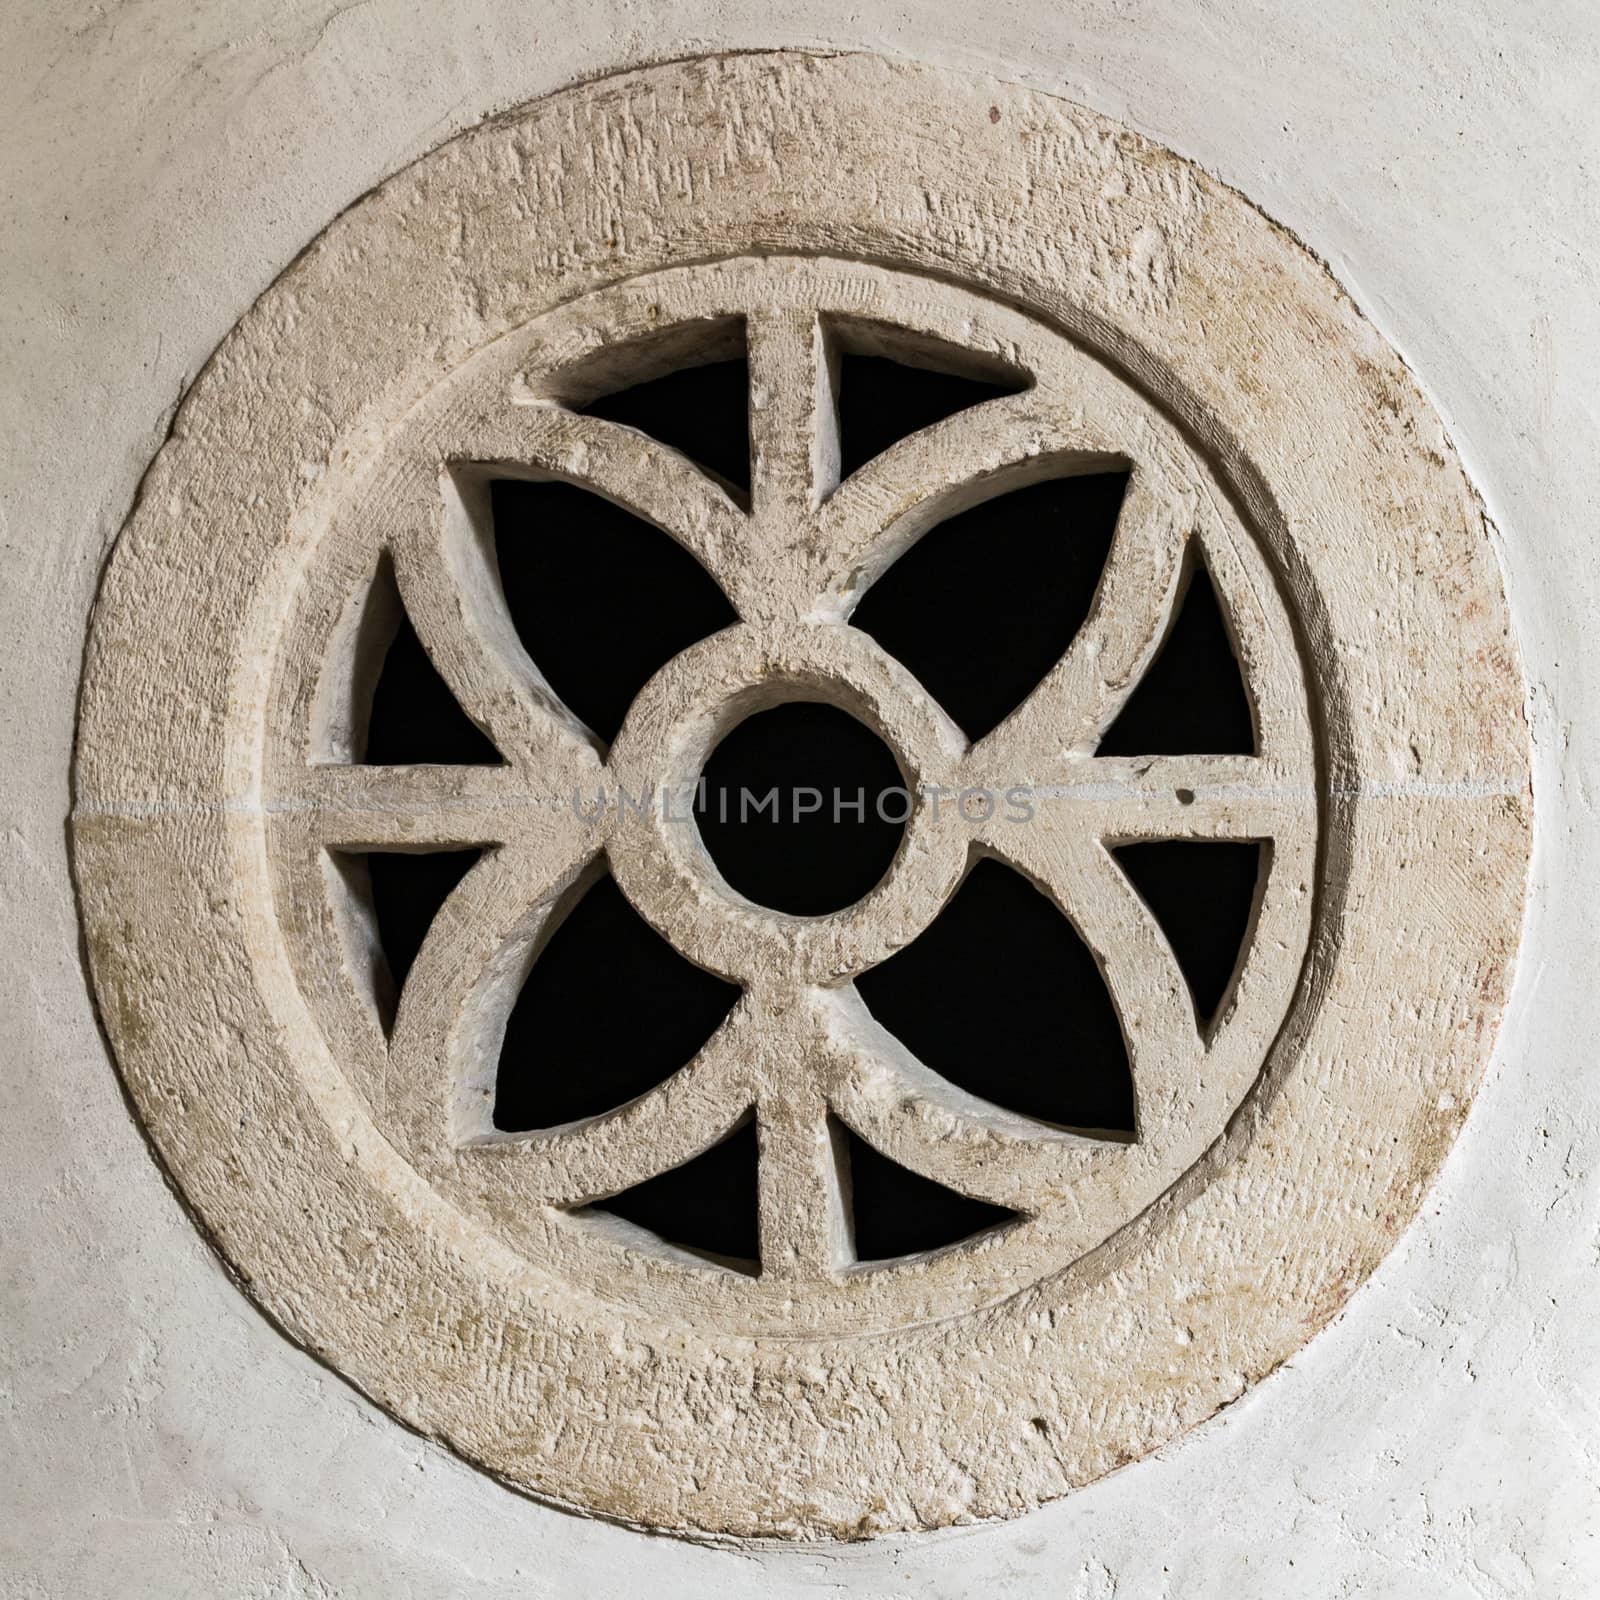 Round stone window within a symmetrical design. by Isaac74